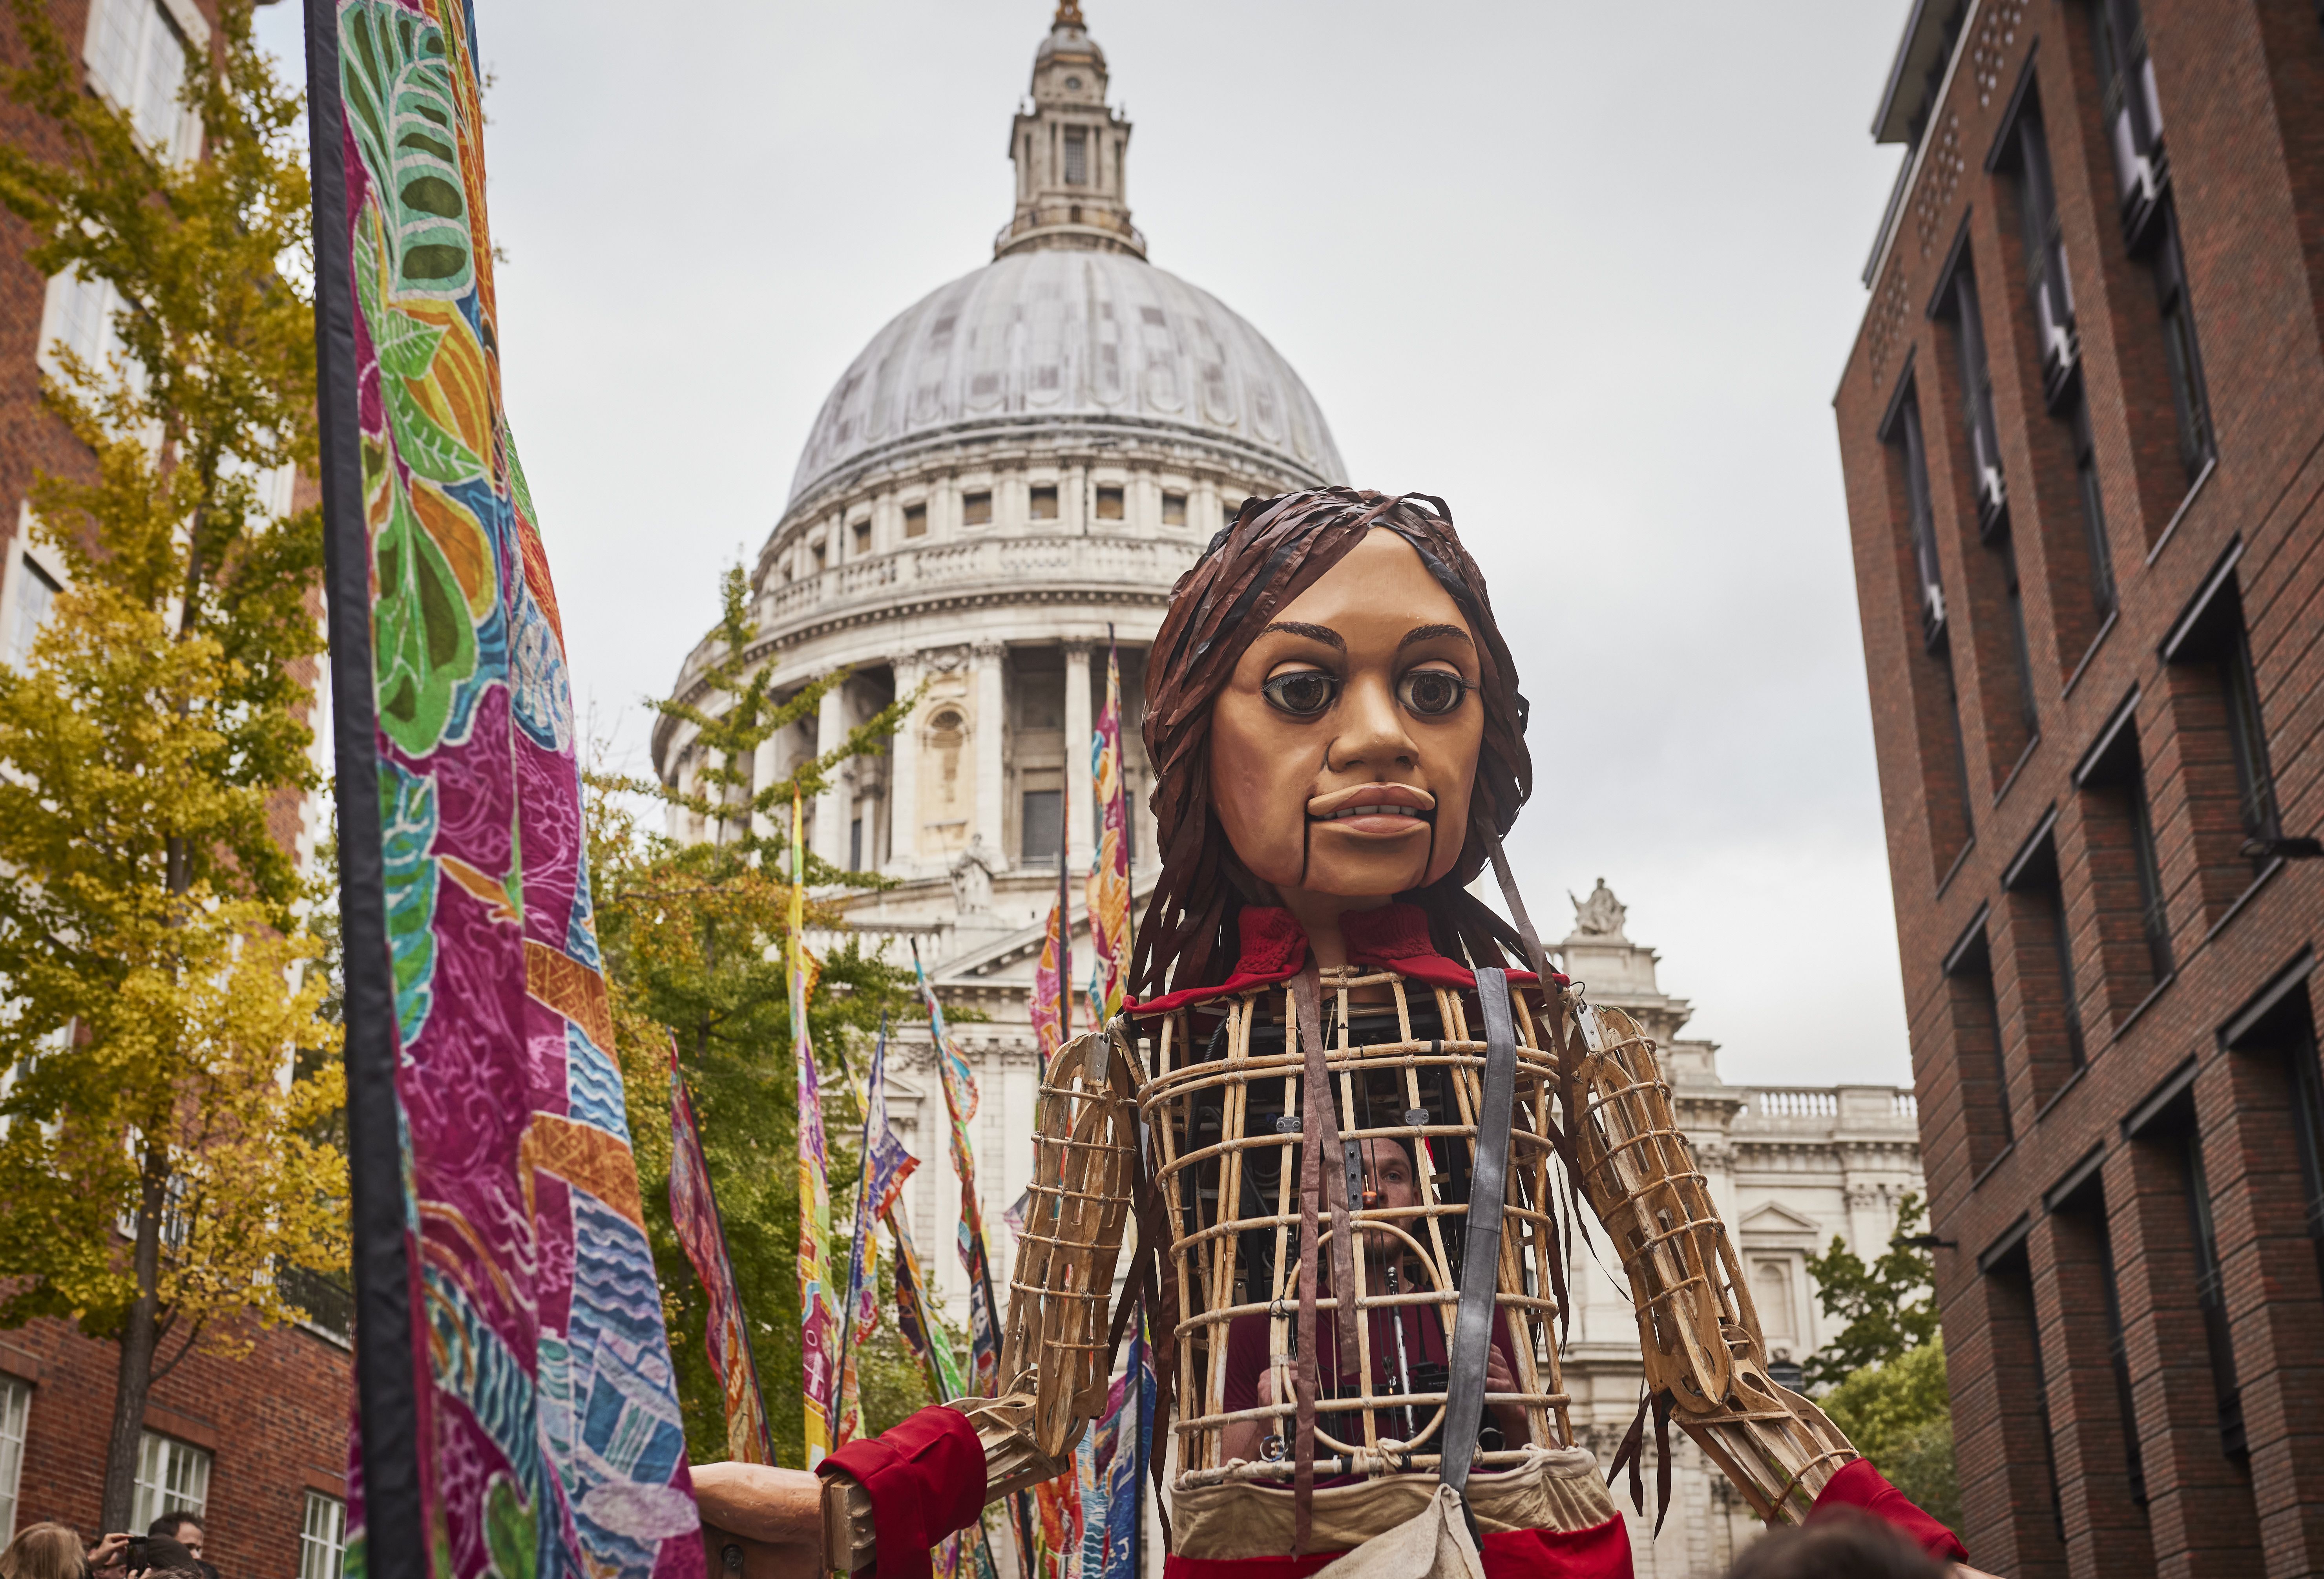 The giant puppet + human rights symbol Little Amal shot at St Paul's London